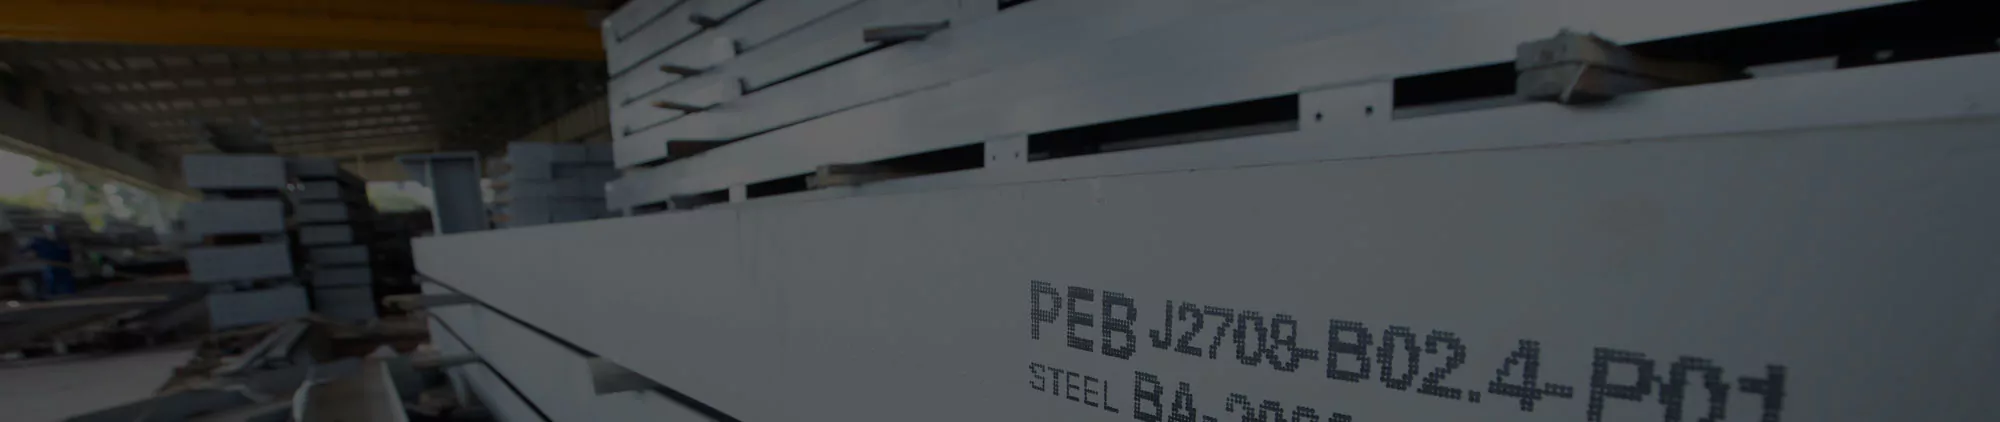 Explore tailored solutions from Pebsteel